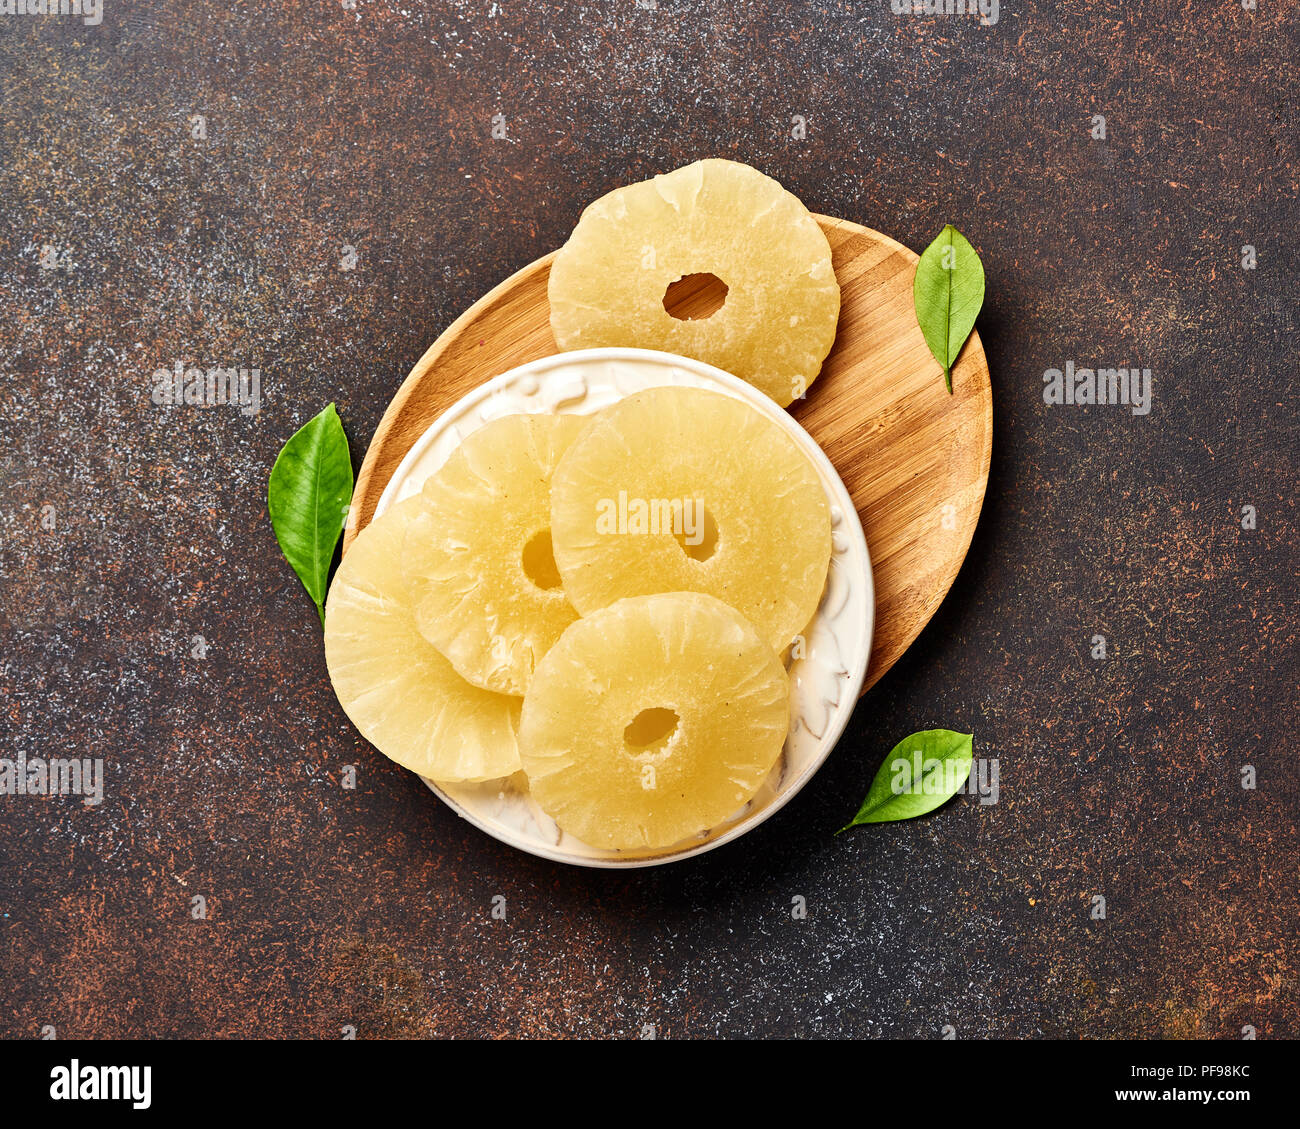 Dried pineapple rings on a brown table. Top viw of sweet paneapple slices. Stock Photo